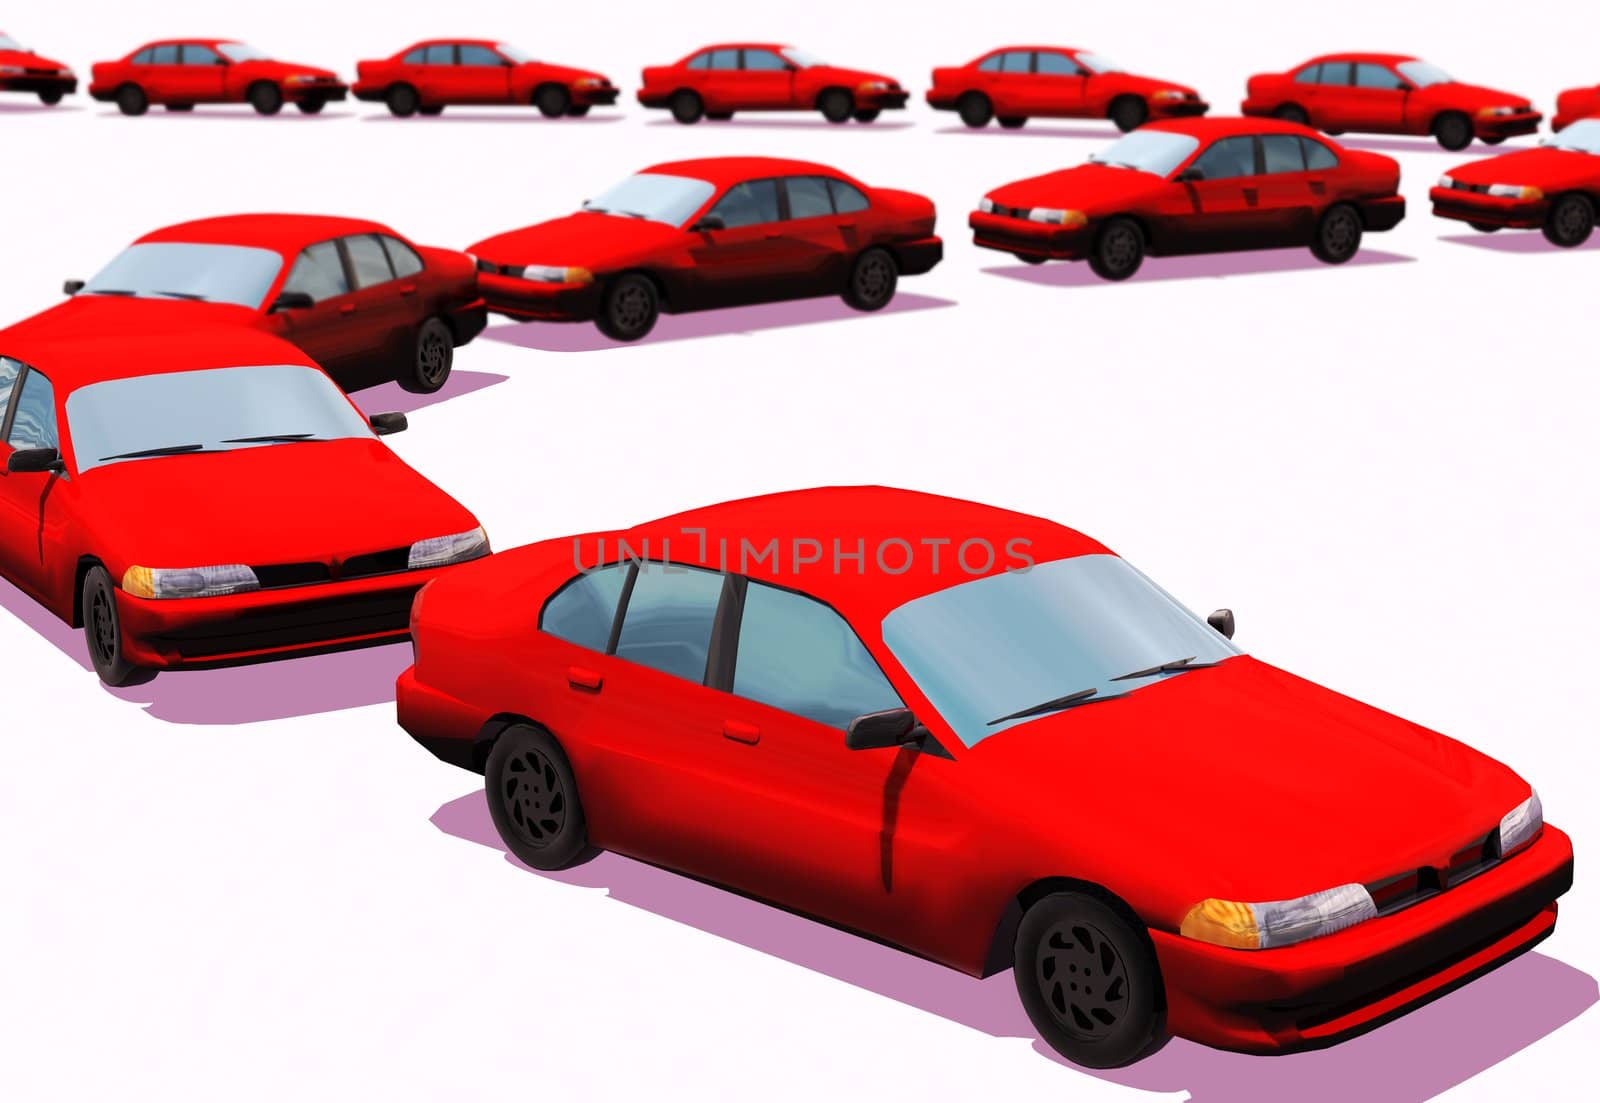 A line of cars with depth of field, the distant cars are out of focus.